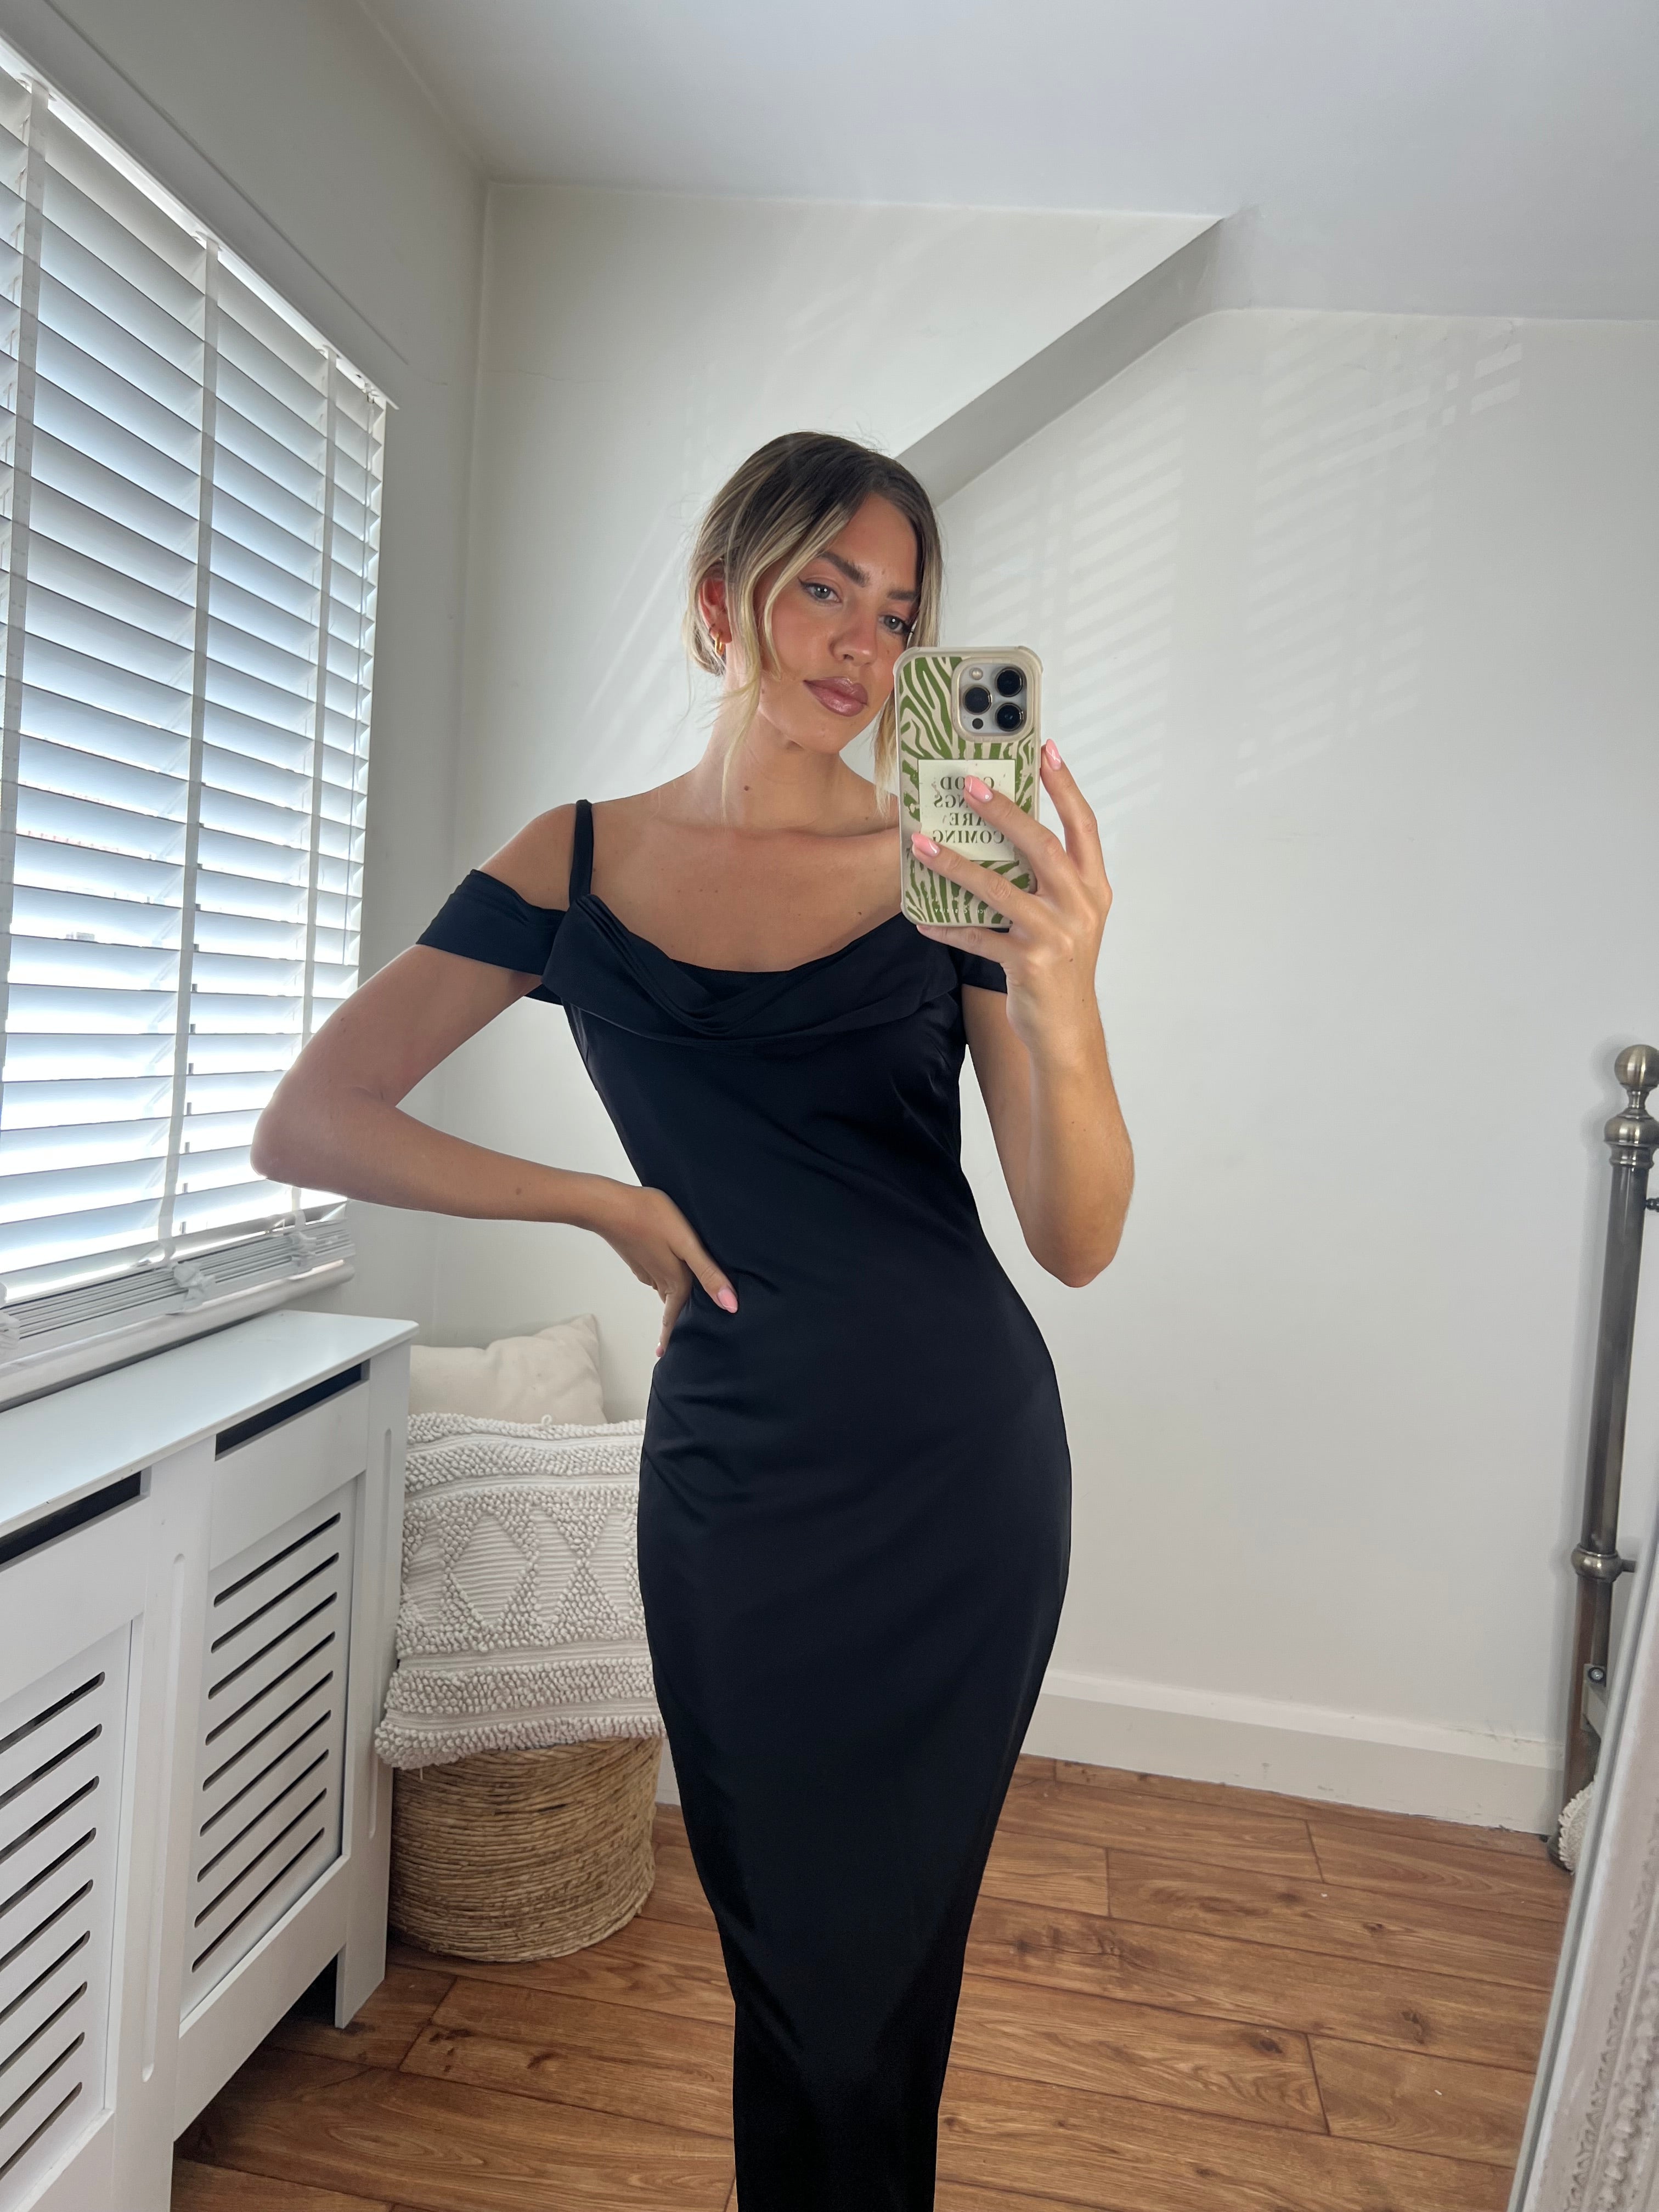 Lizzie Draped Off The Shoulder Cowl Neck Long Maxi Dress in Black